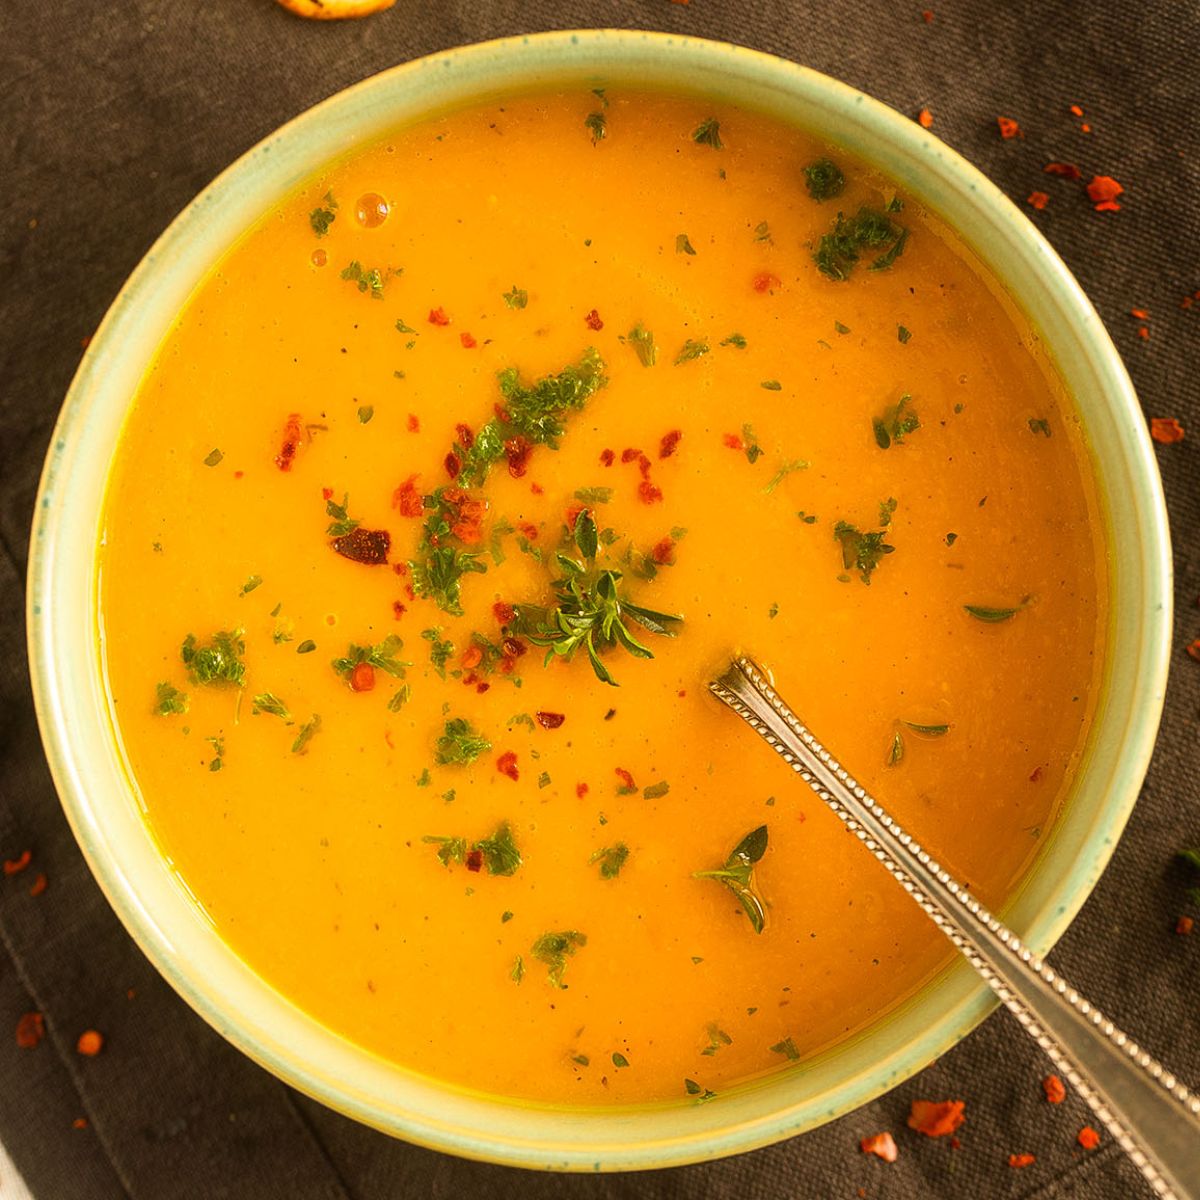 bowl of pumpkin soup without cream sprinkled with chili and parsley.